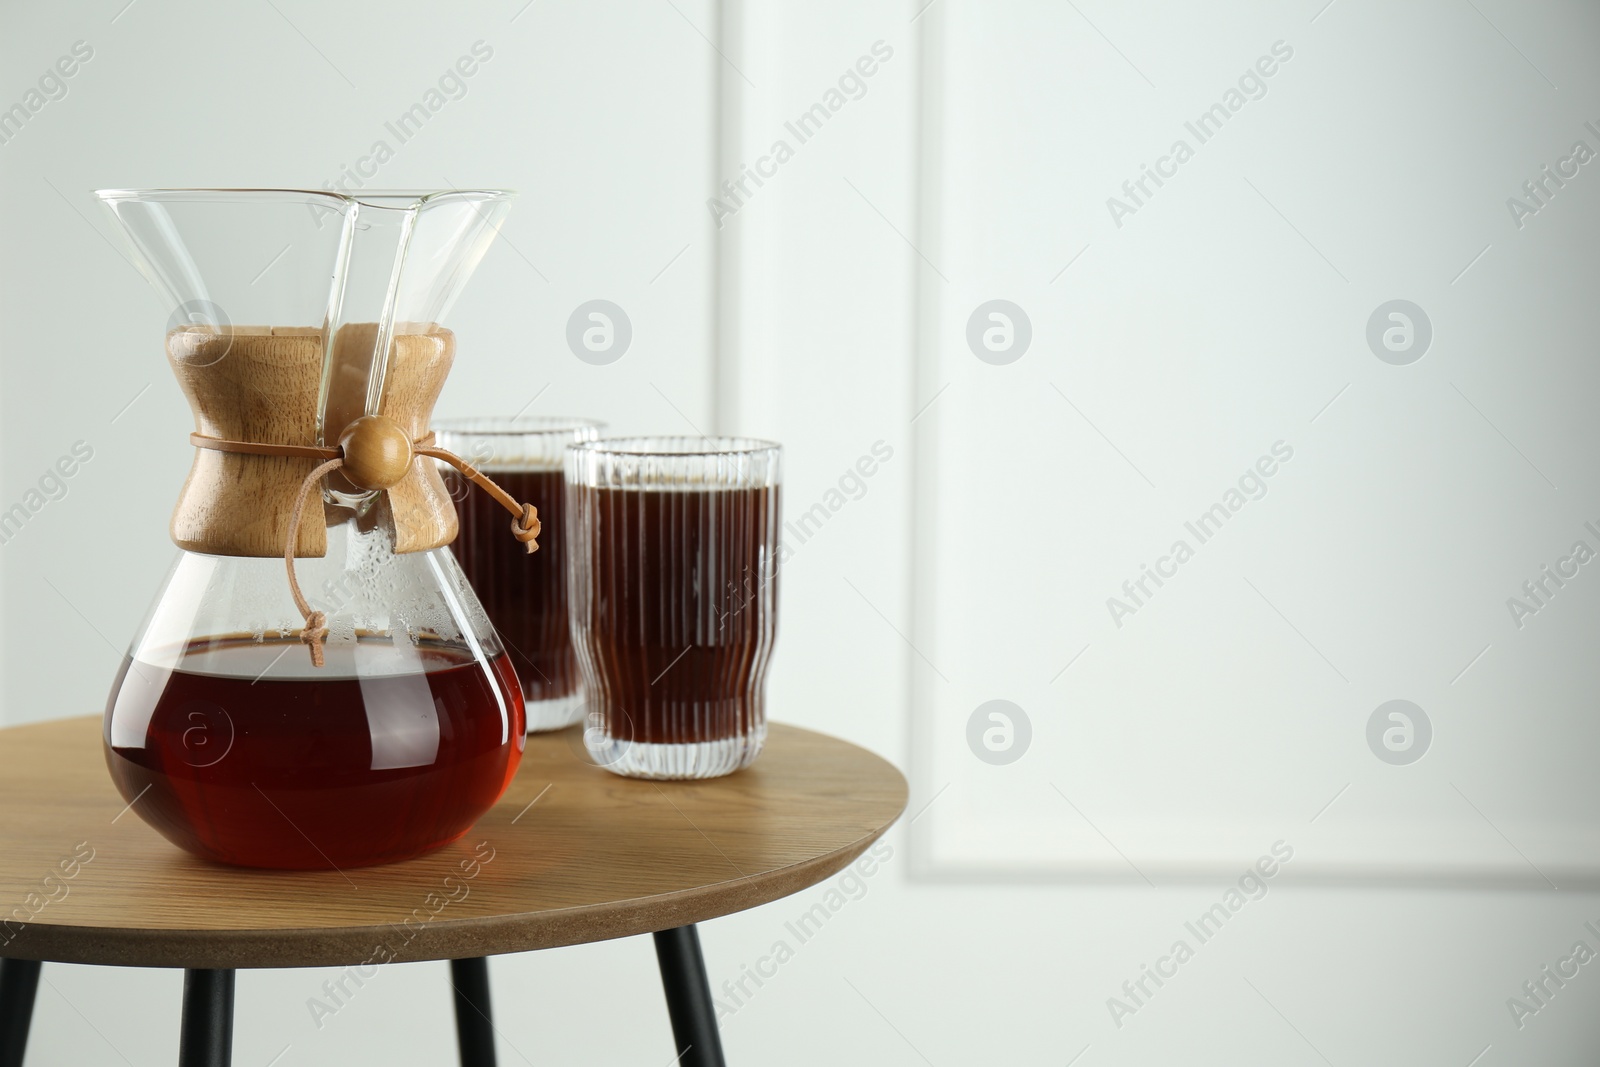 Photo of Glass chemex coffeemaker and glasses of coffee on wooden table against white wall, space for text